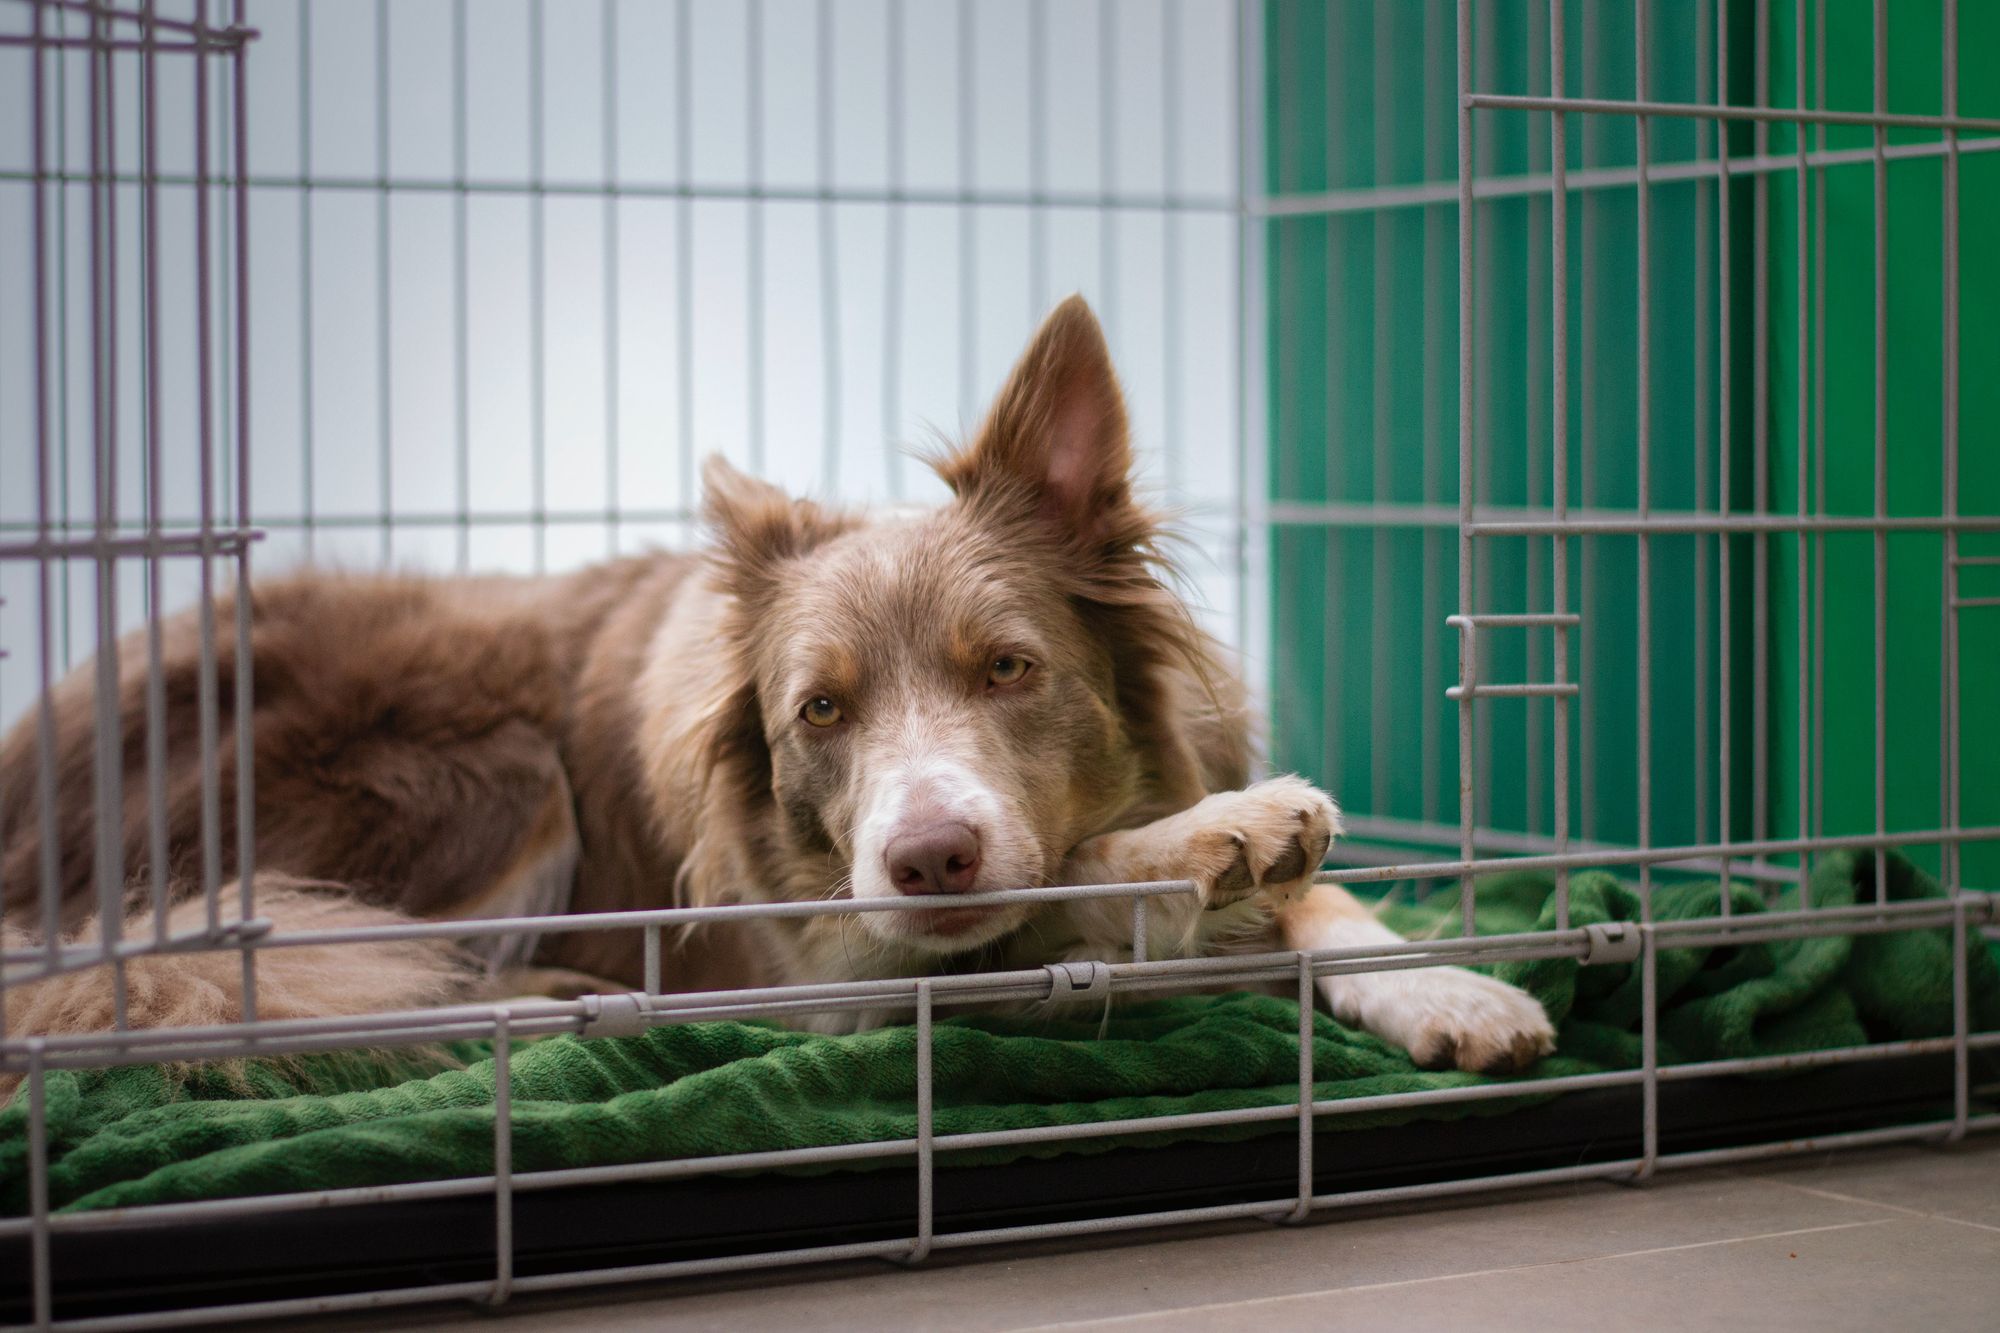 What to do when your dog cries in their crate